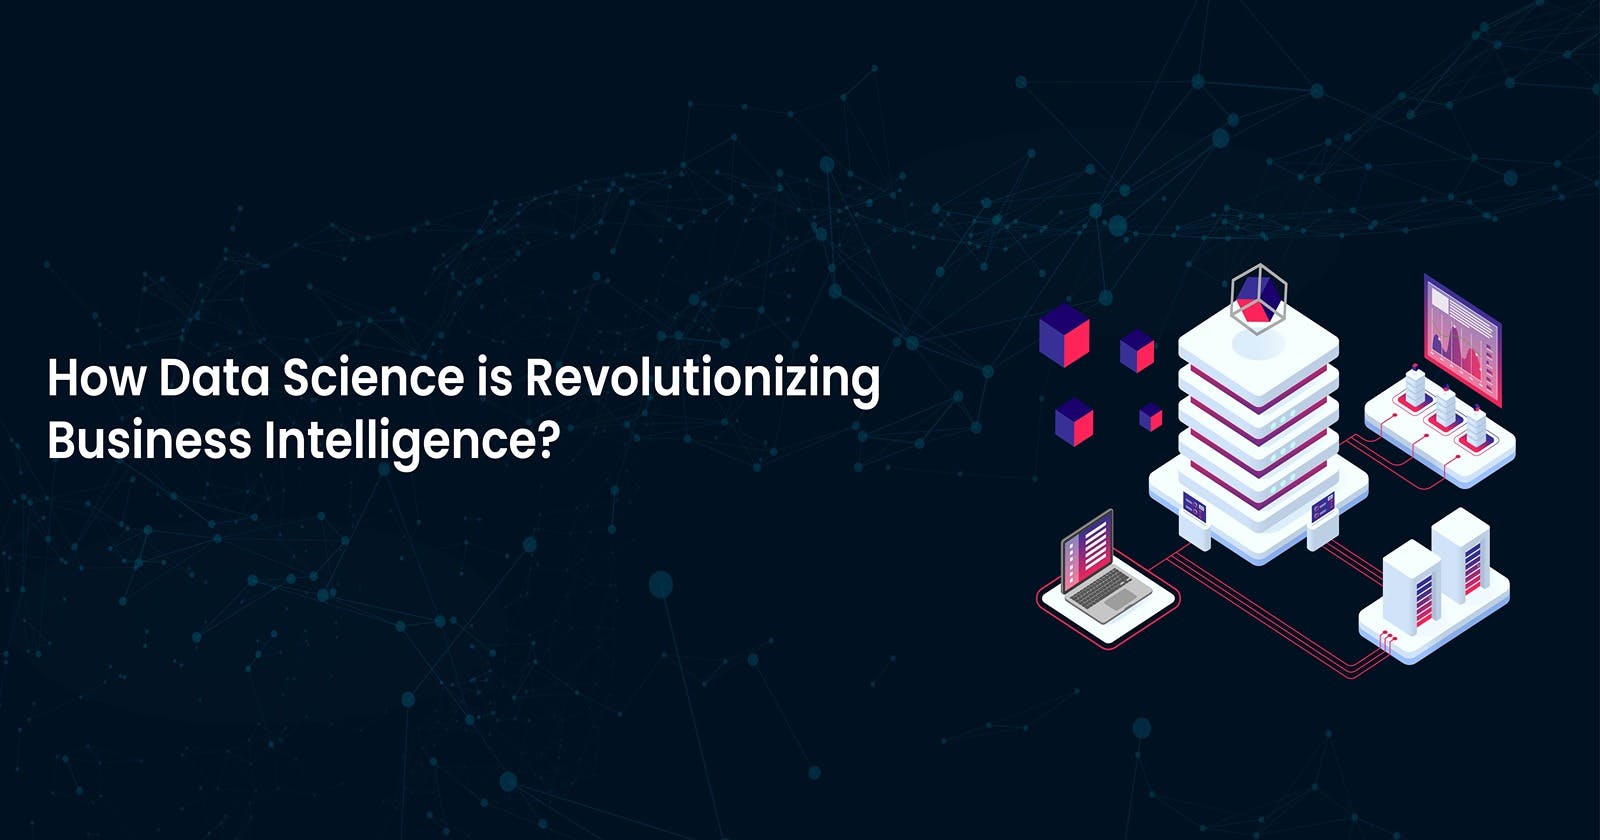 How Data Science is Revolutionizing Business Intelligence?